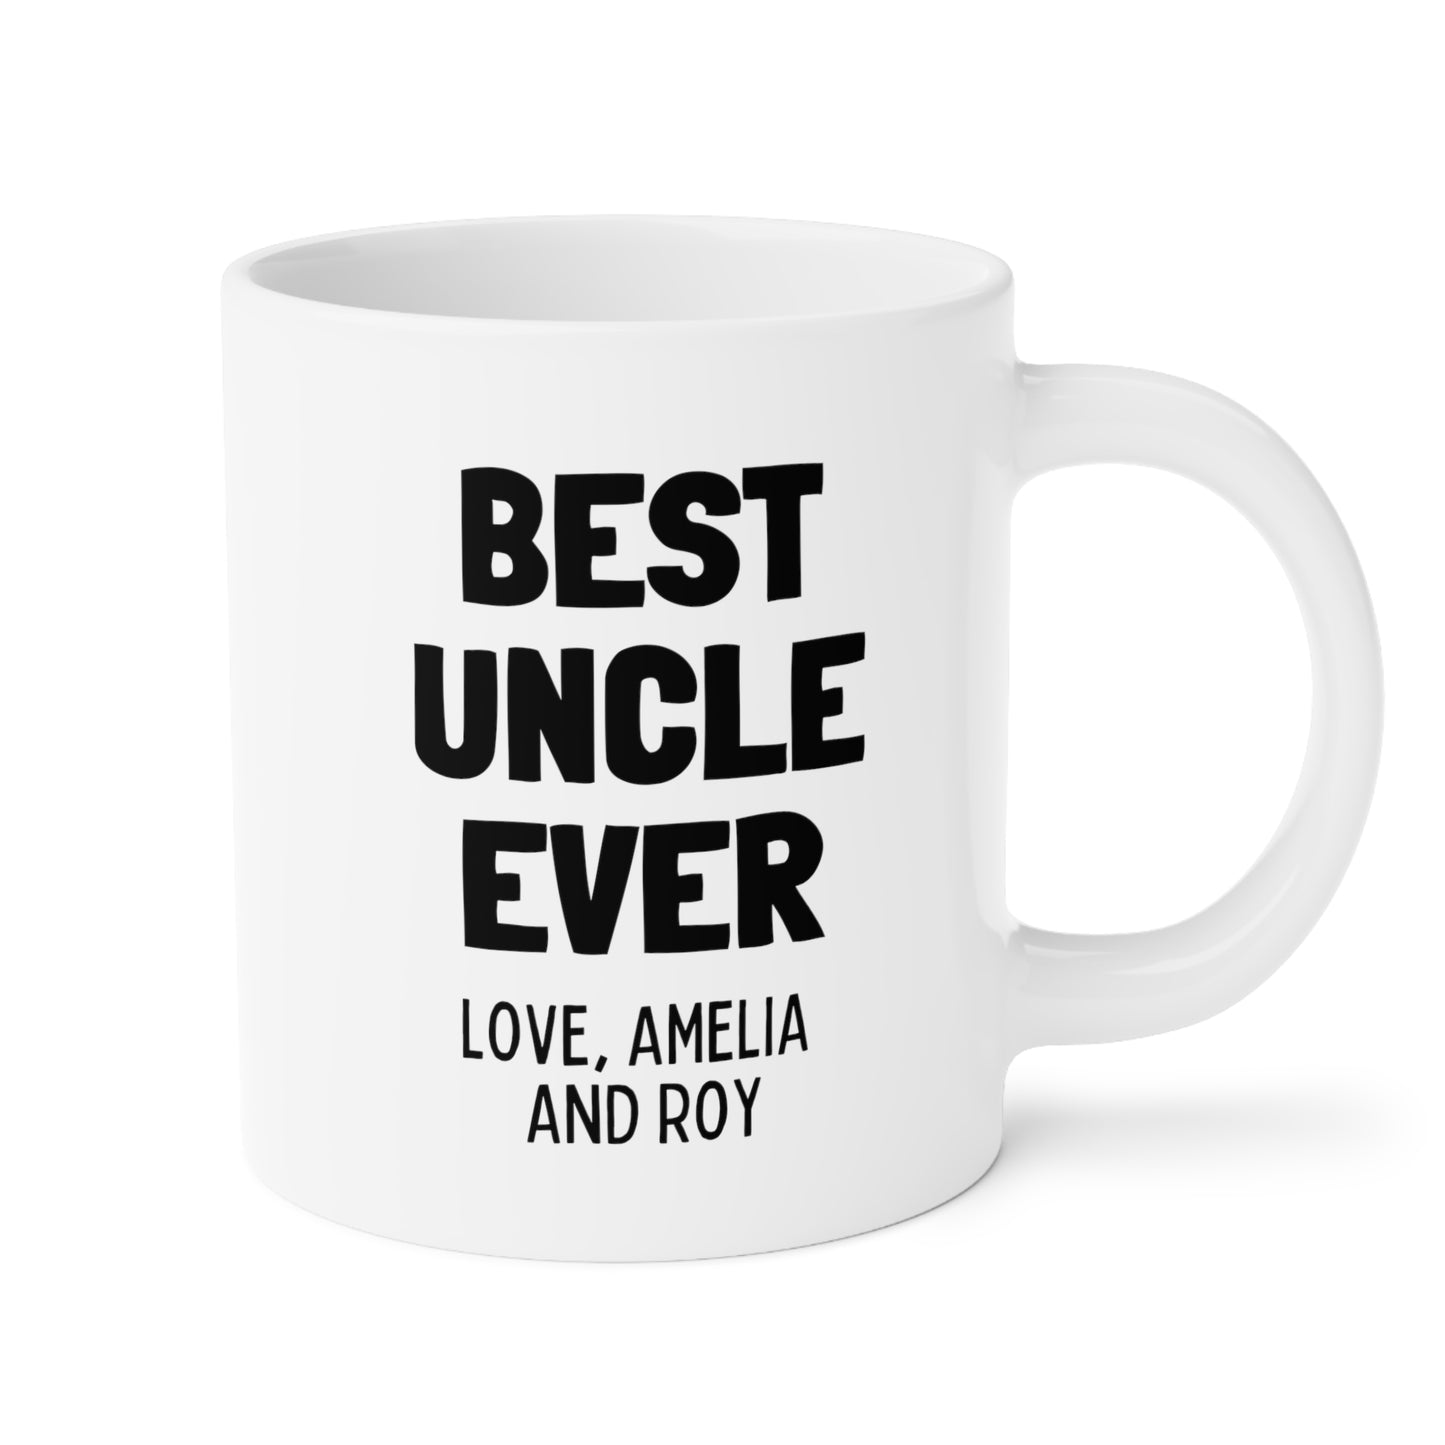 Best Uncle Ever 20oz white funny large coffee mug gift customized custom from niece nephew cups personalized waveywares wavey wares wavywares wavy wares